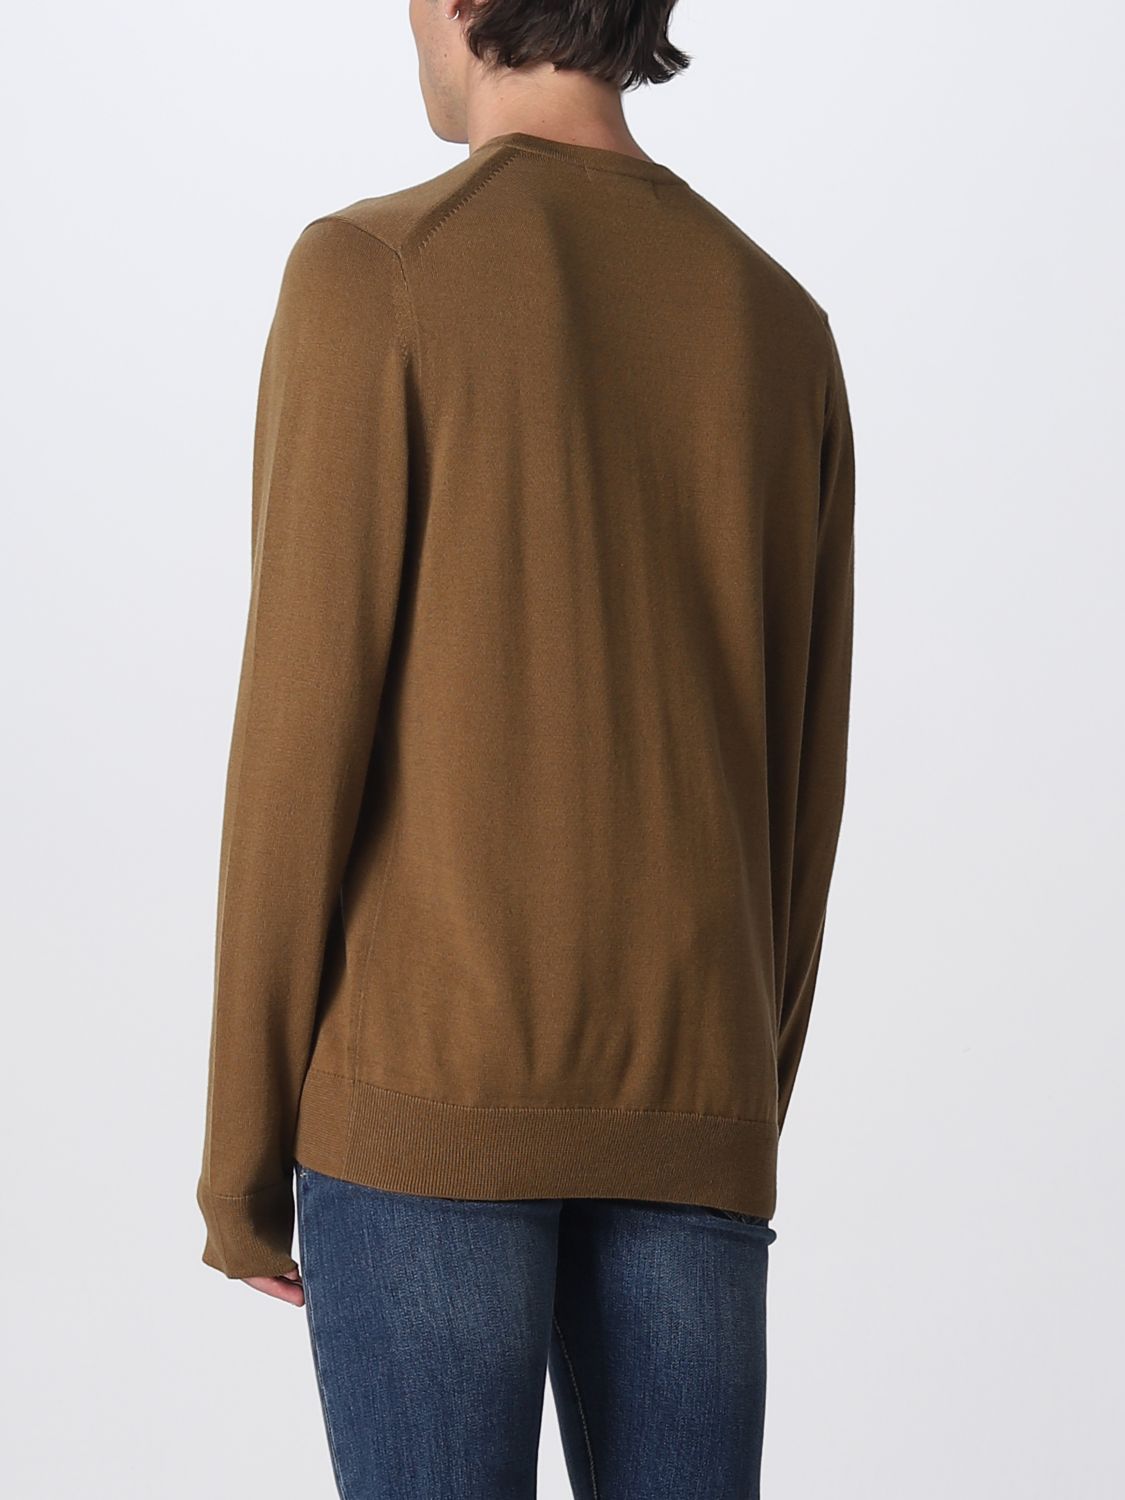 Sweater Fred Perry: Fred Perry sweater for man savannah 2